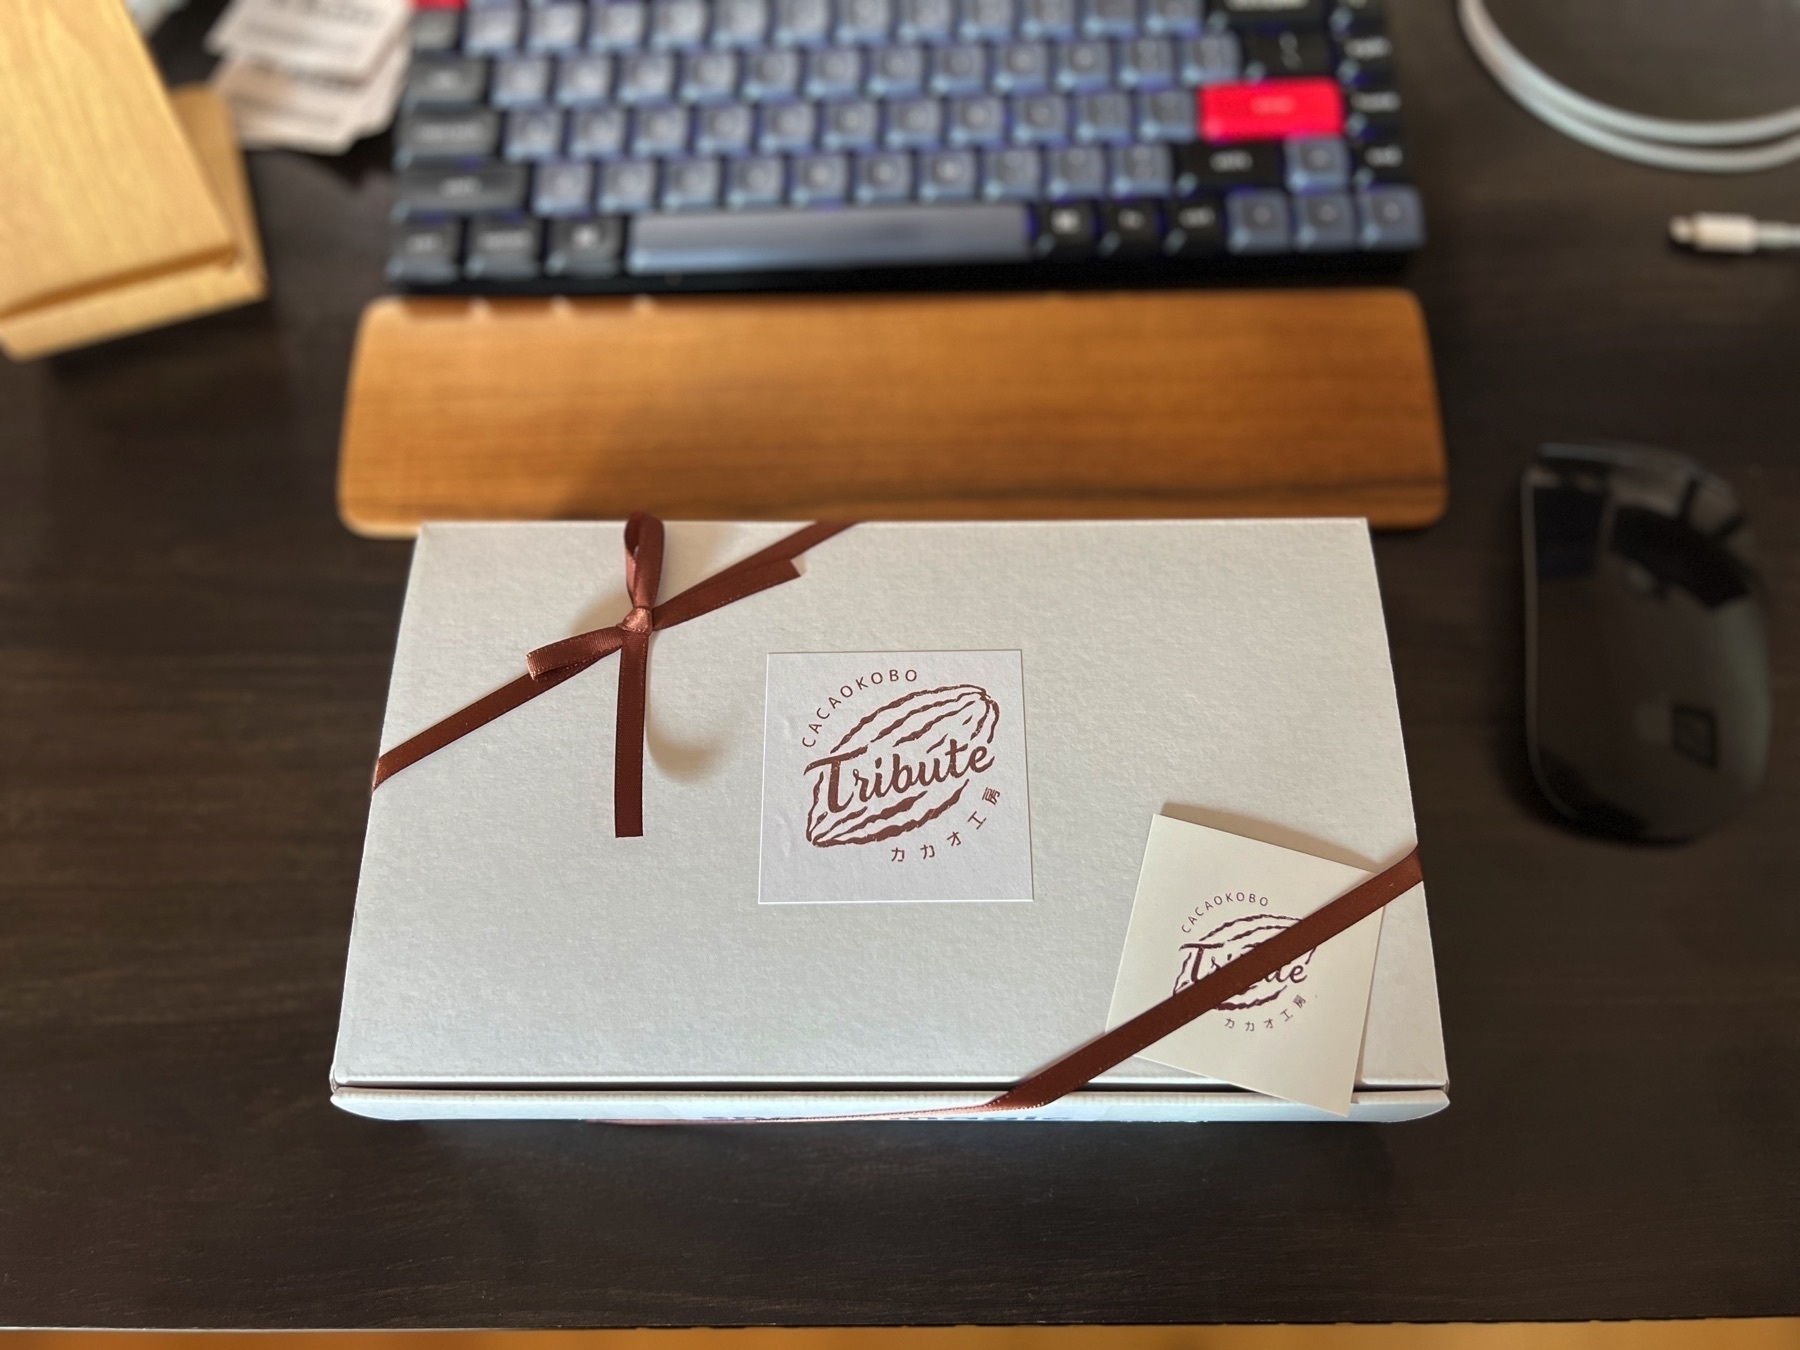 A ribboned box sits on a desk by a mechanical keyboard and mouse. The label on the box says “Cacao Kobo: Tribute”